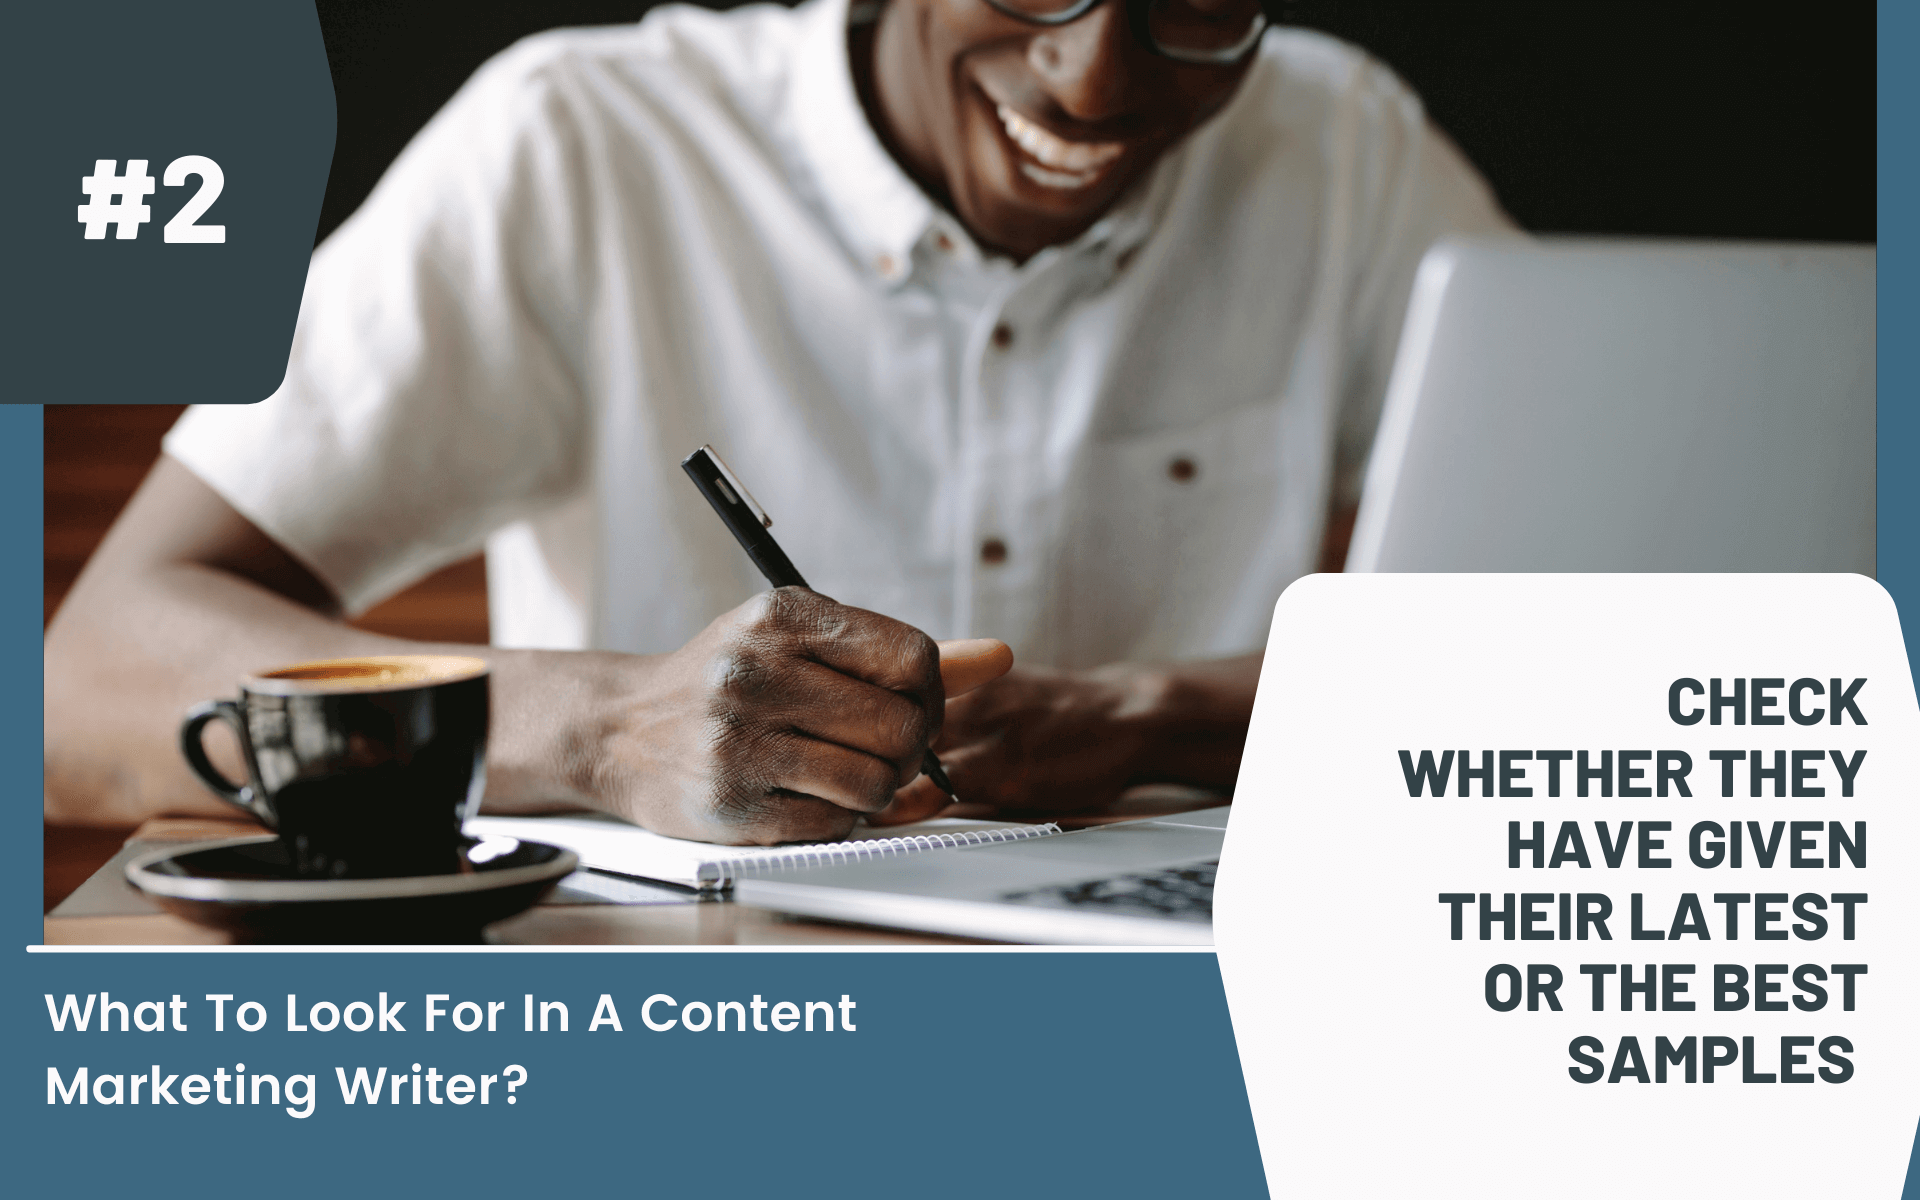 Check Whether They Have Given Their Latest Or The Best Samples  Content Writing 101